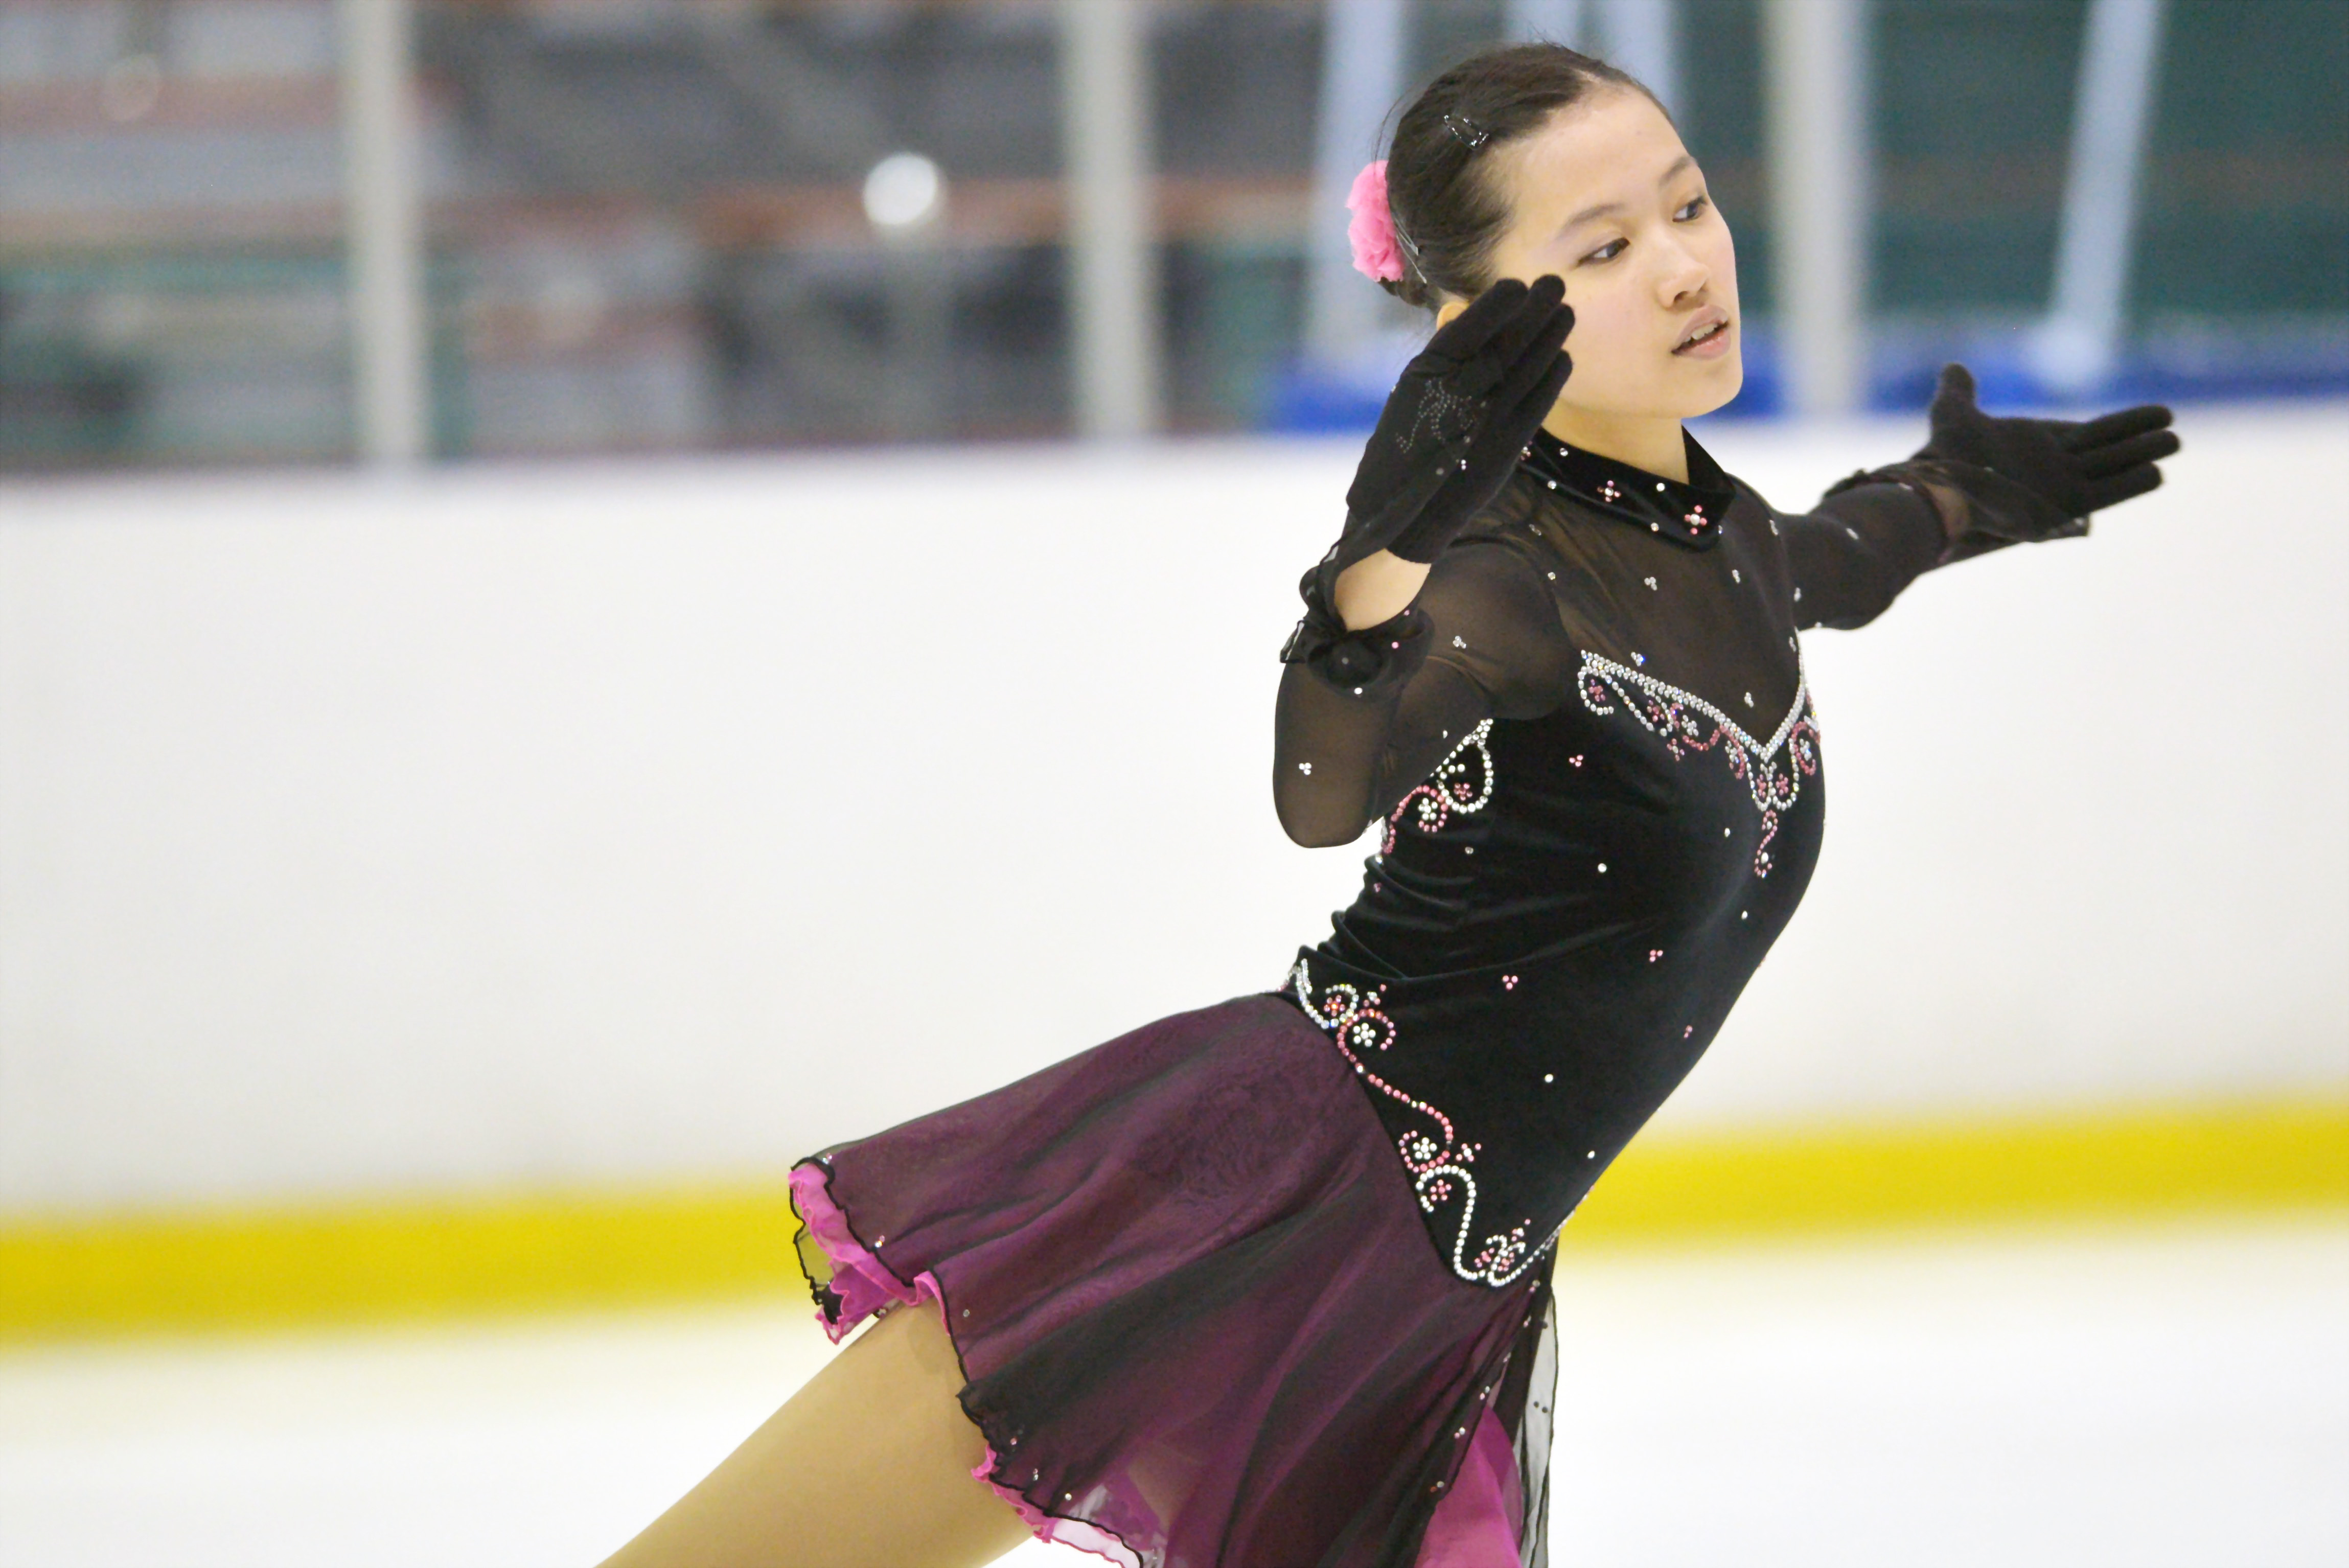 Hsieh Hsuan at the Dept. of CSIE, National Figure Skater, Develops an Action Analysis System for Figure Skating